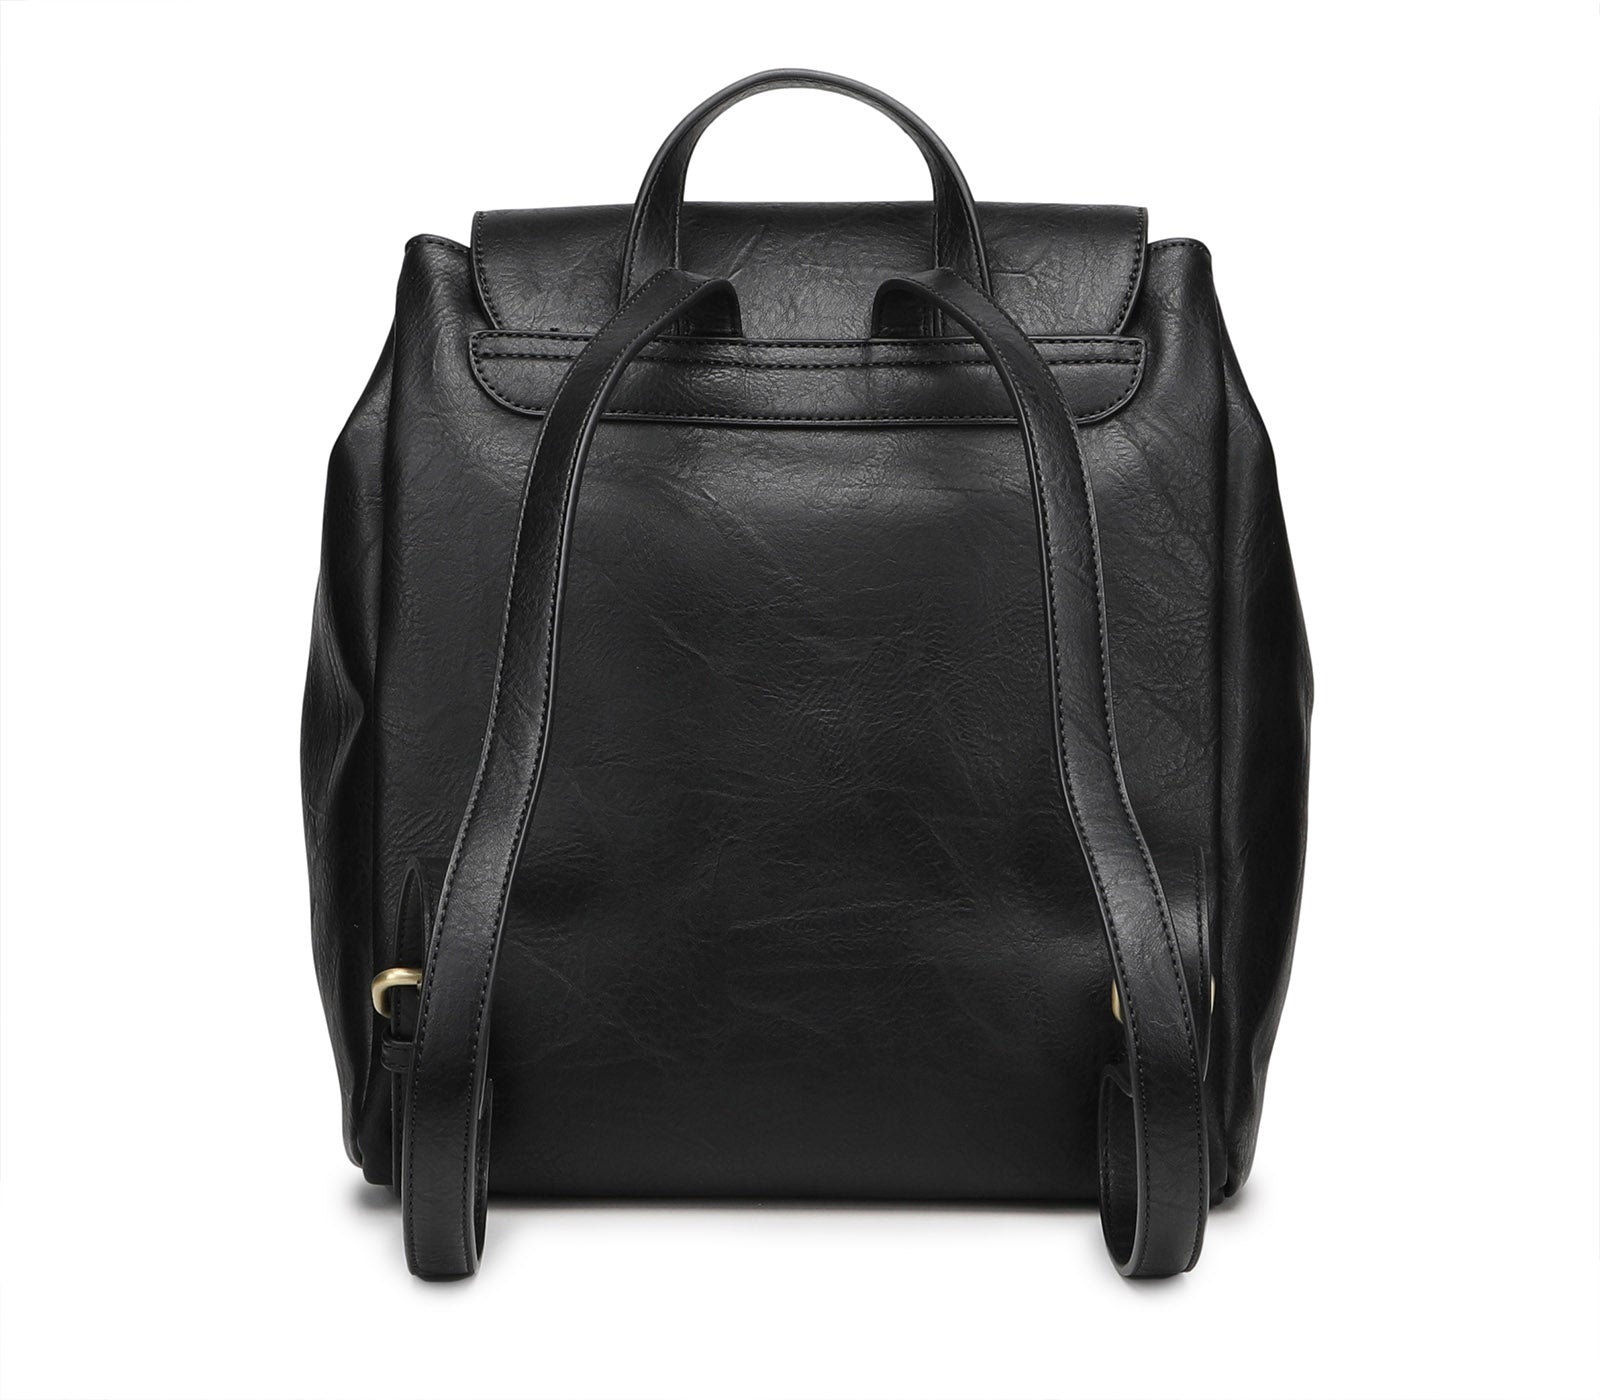 Black Backpack with Large Compartment and Double Drawstring Closure